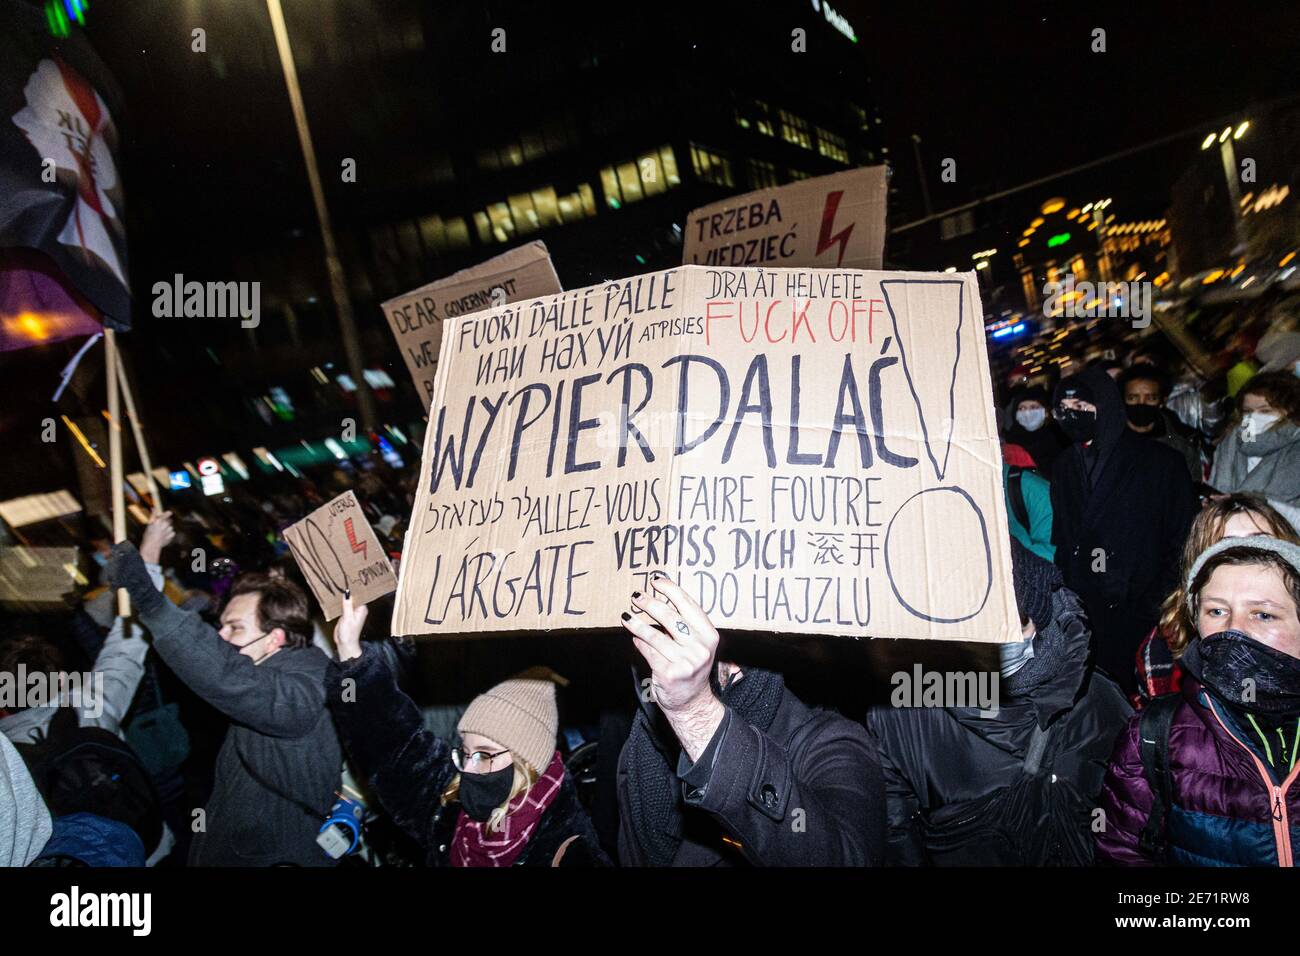 Wroclaw, Poland. 29th Jan, 2021. Jan 29, 2021 Poland, Wroclaw. Massive protests across the country against the ruling of the Constitutional Tribunal banning eugenic abortion in Poland. Credit: Krzysztof Kaniewski/ZUMA Wire/Alamy Live News Stock Photo